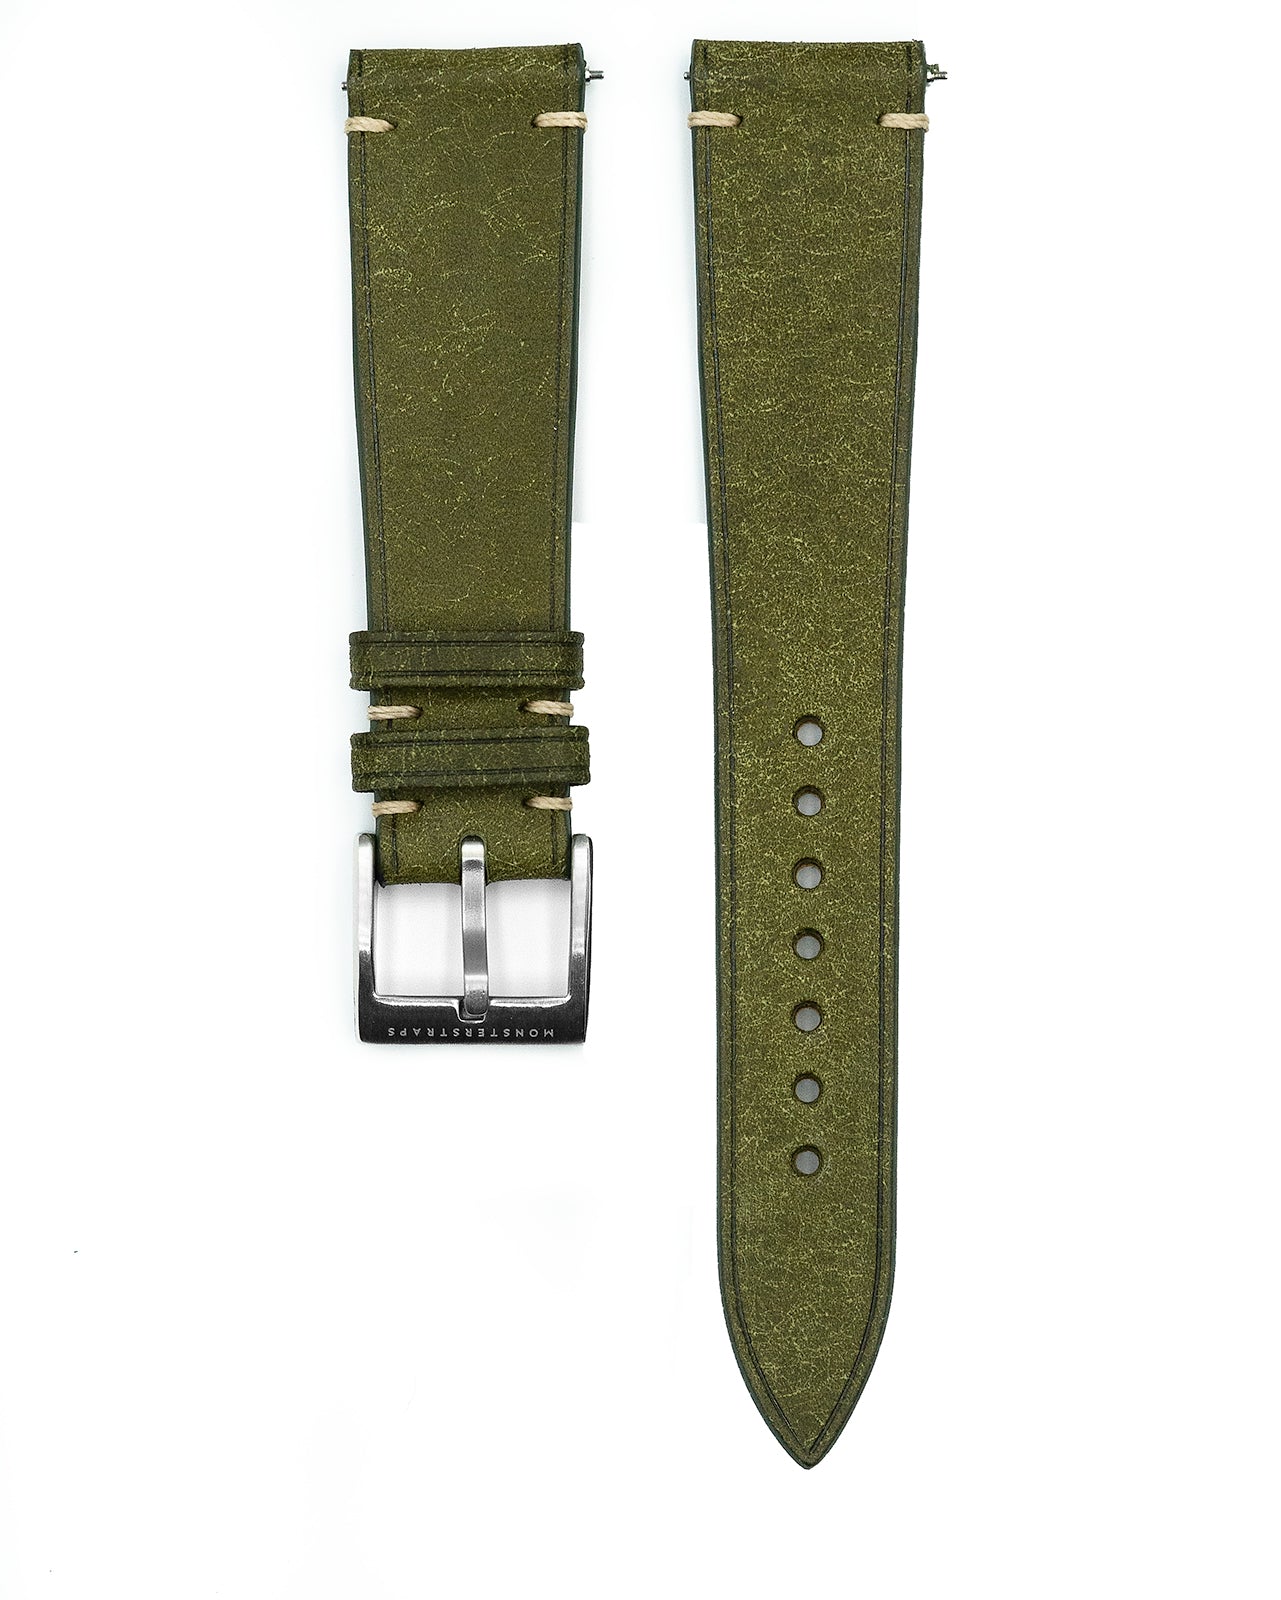 Vintage Italian Distressed Leather Strap (Olive Green)